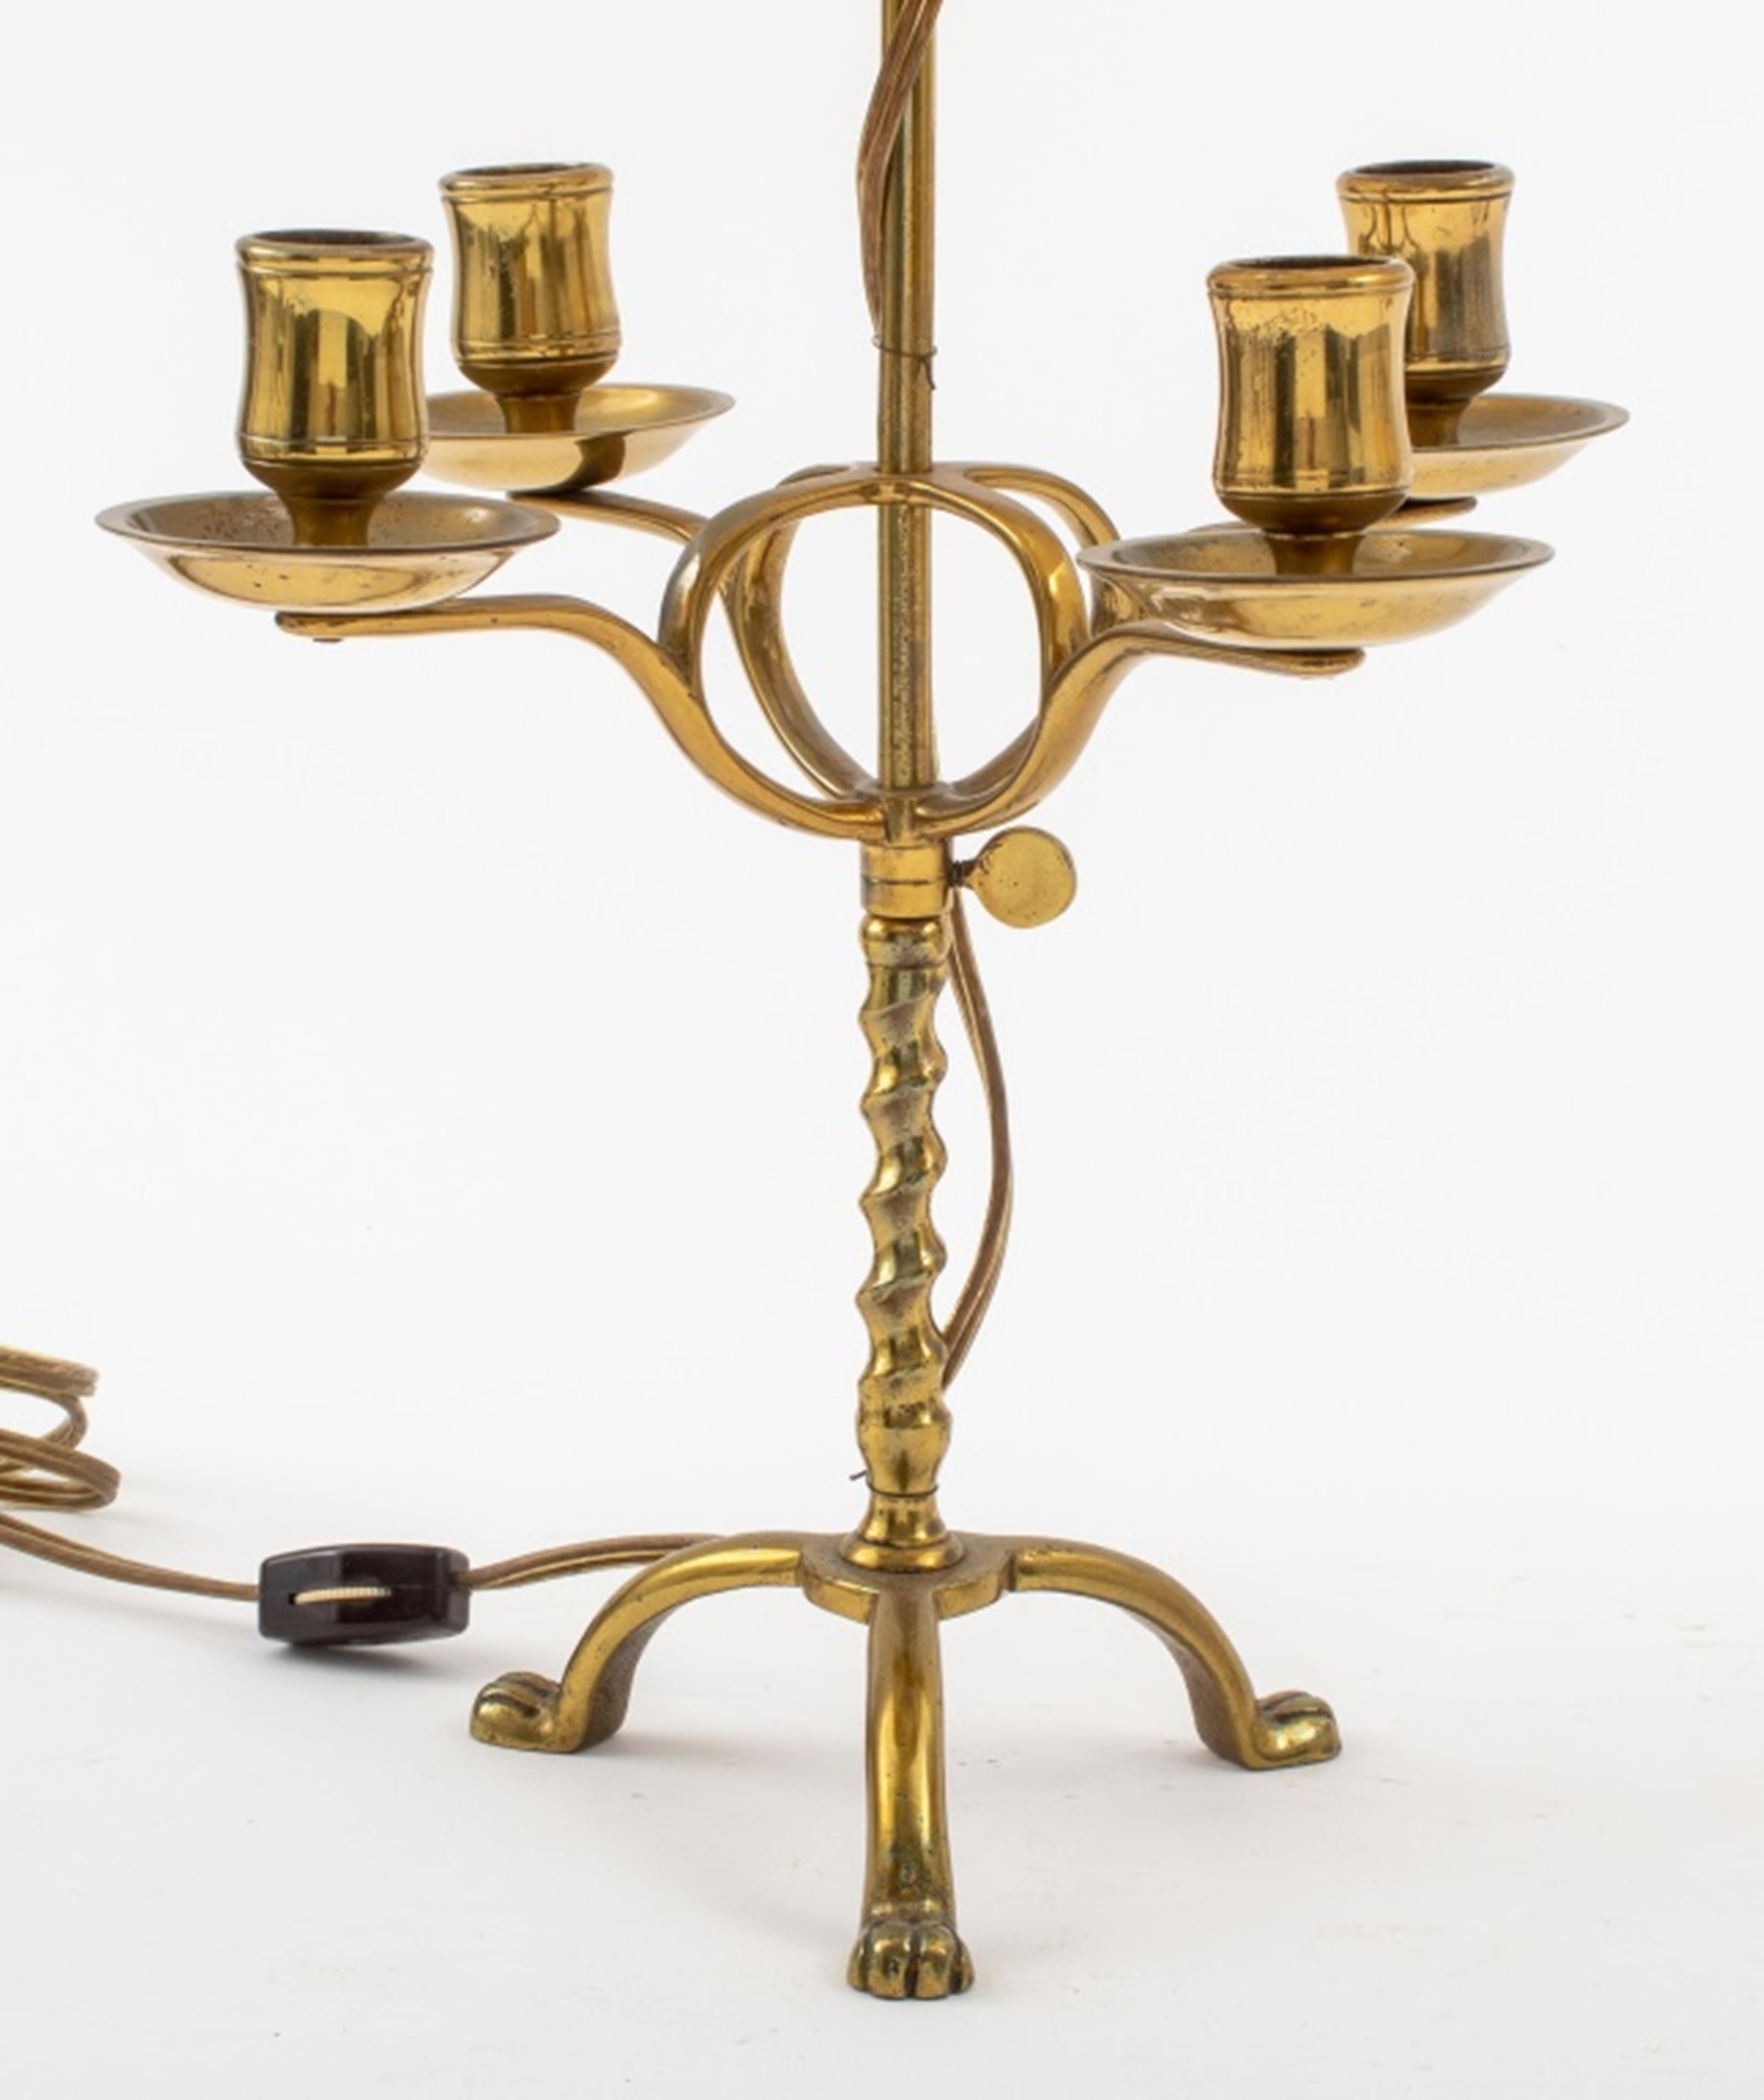 Pair of brass lamps, with four arms for candles, later addition of two sockets for light bulbs, unmarked. 
Dimensions: 21.5